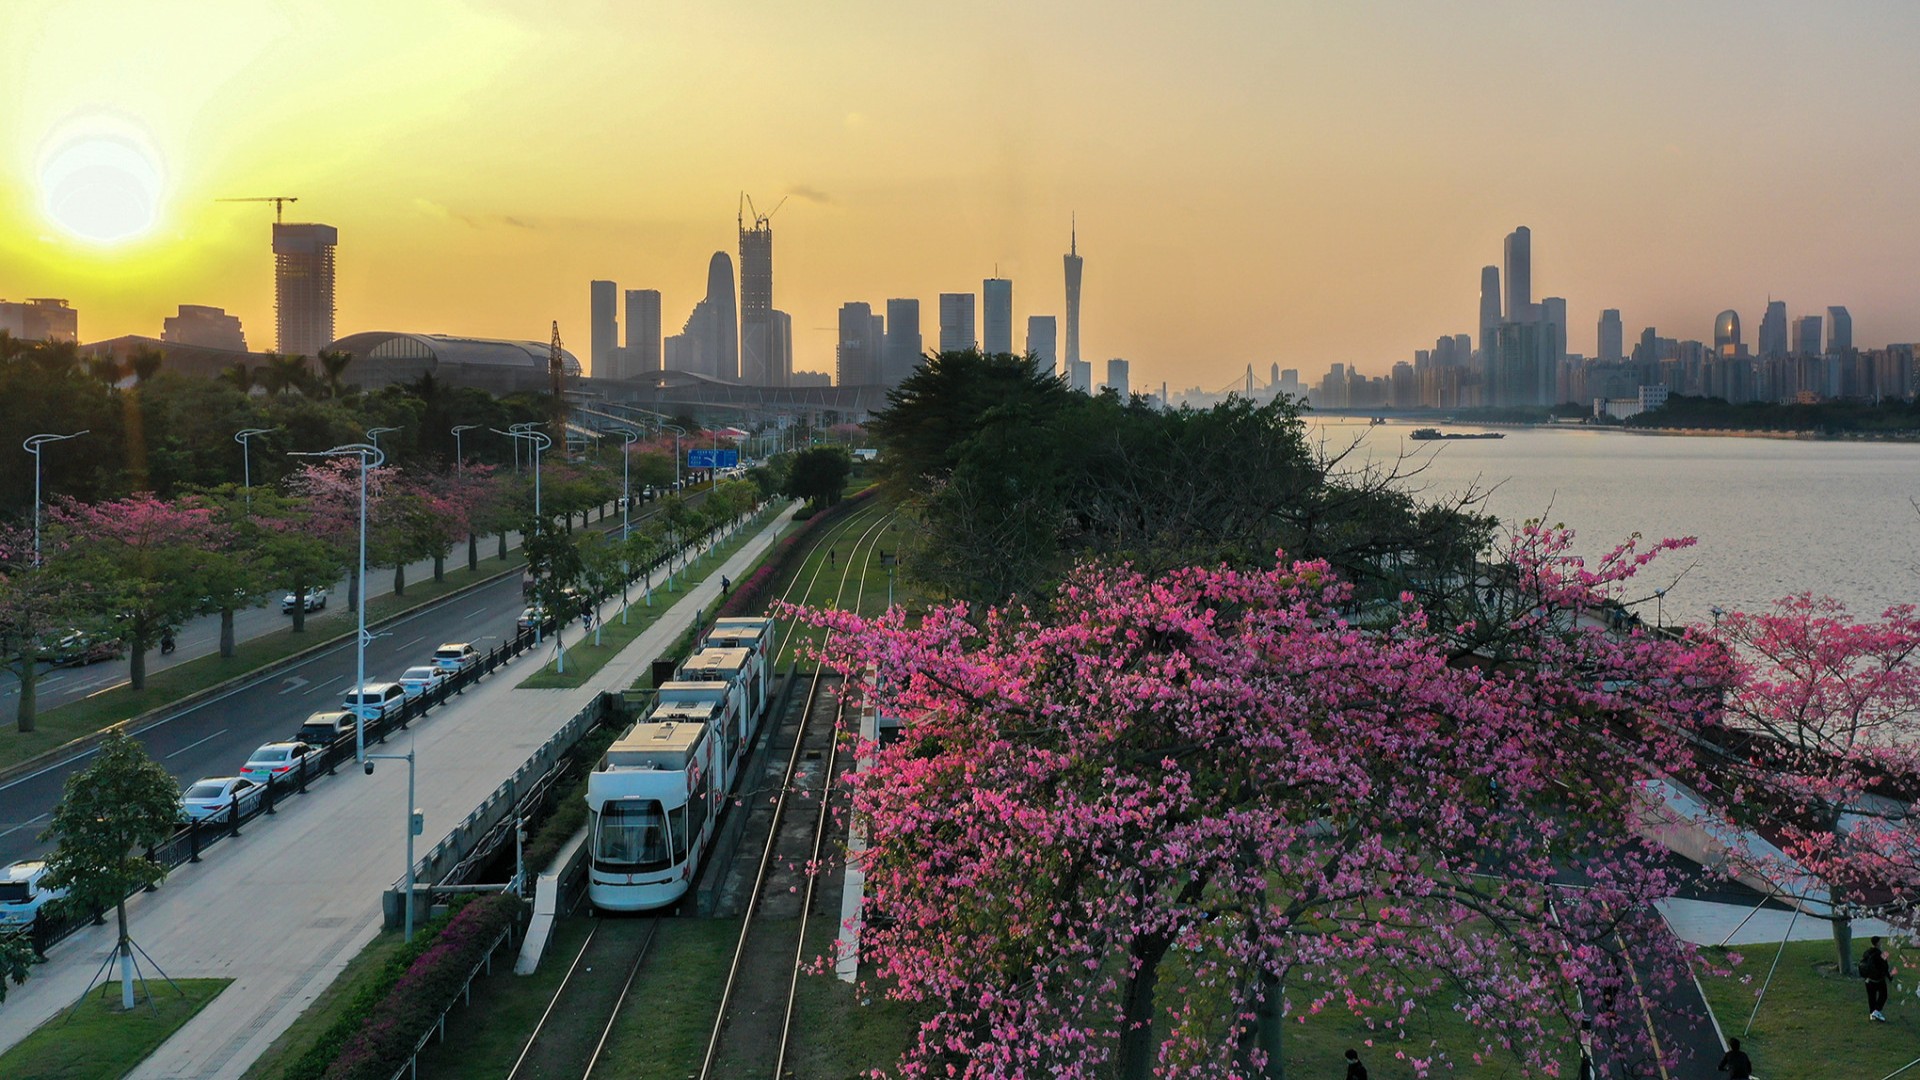 One-day tour in Guangzhou: From airport to city's best attractions